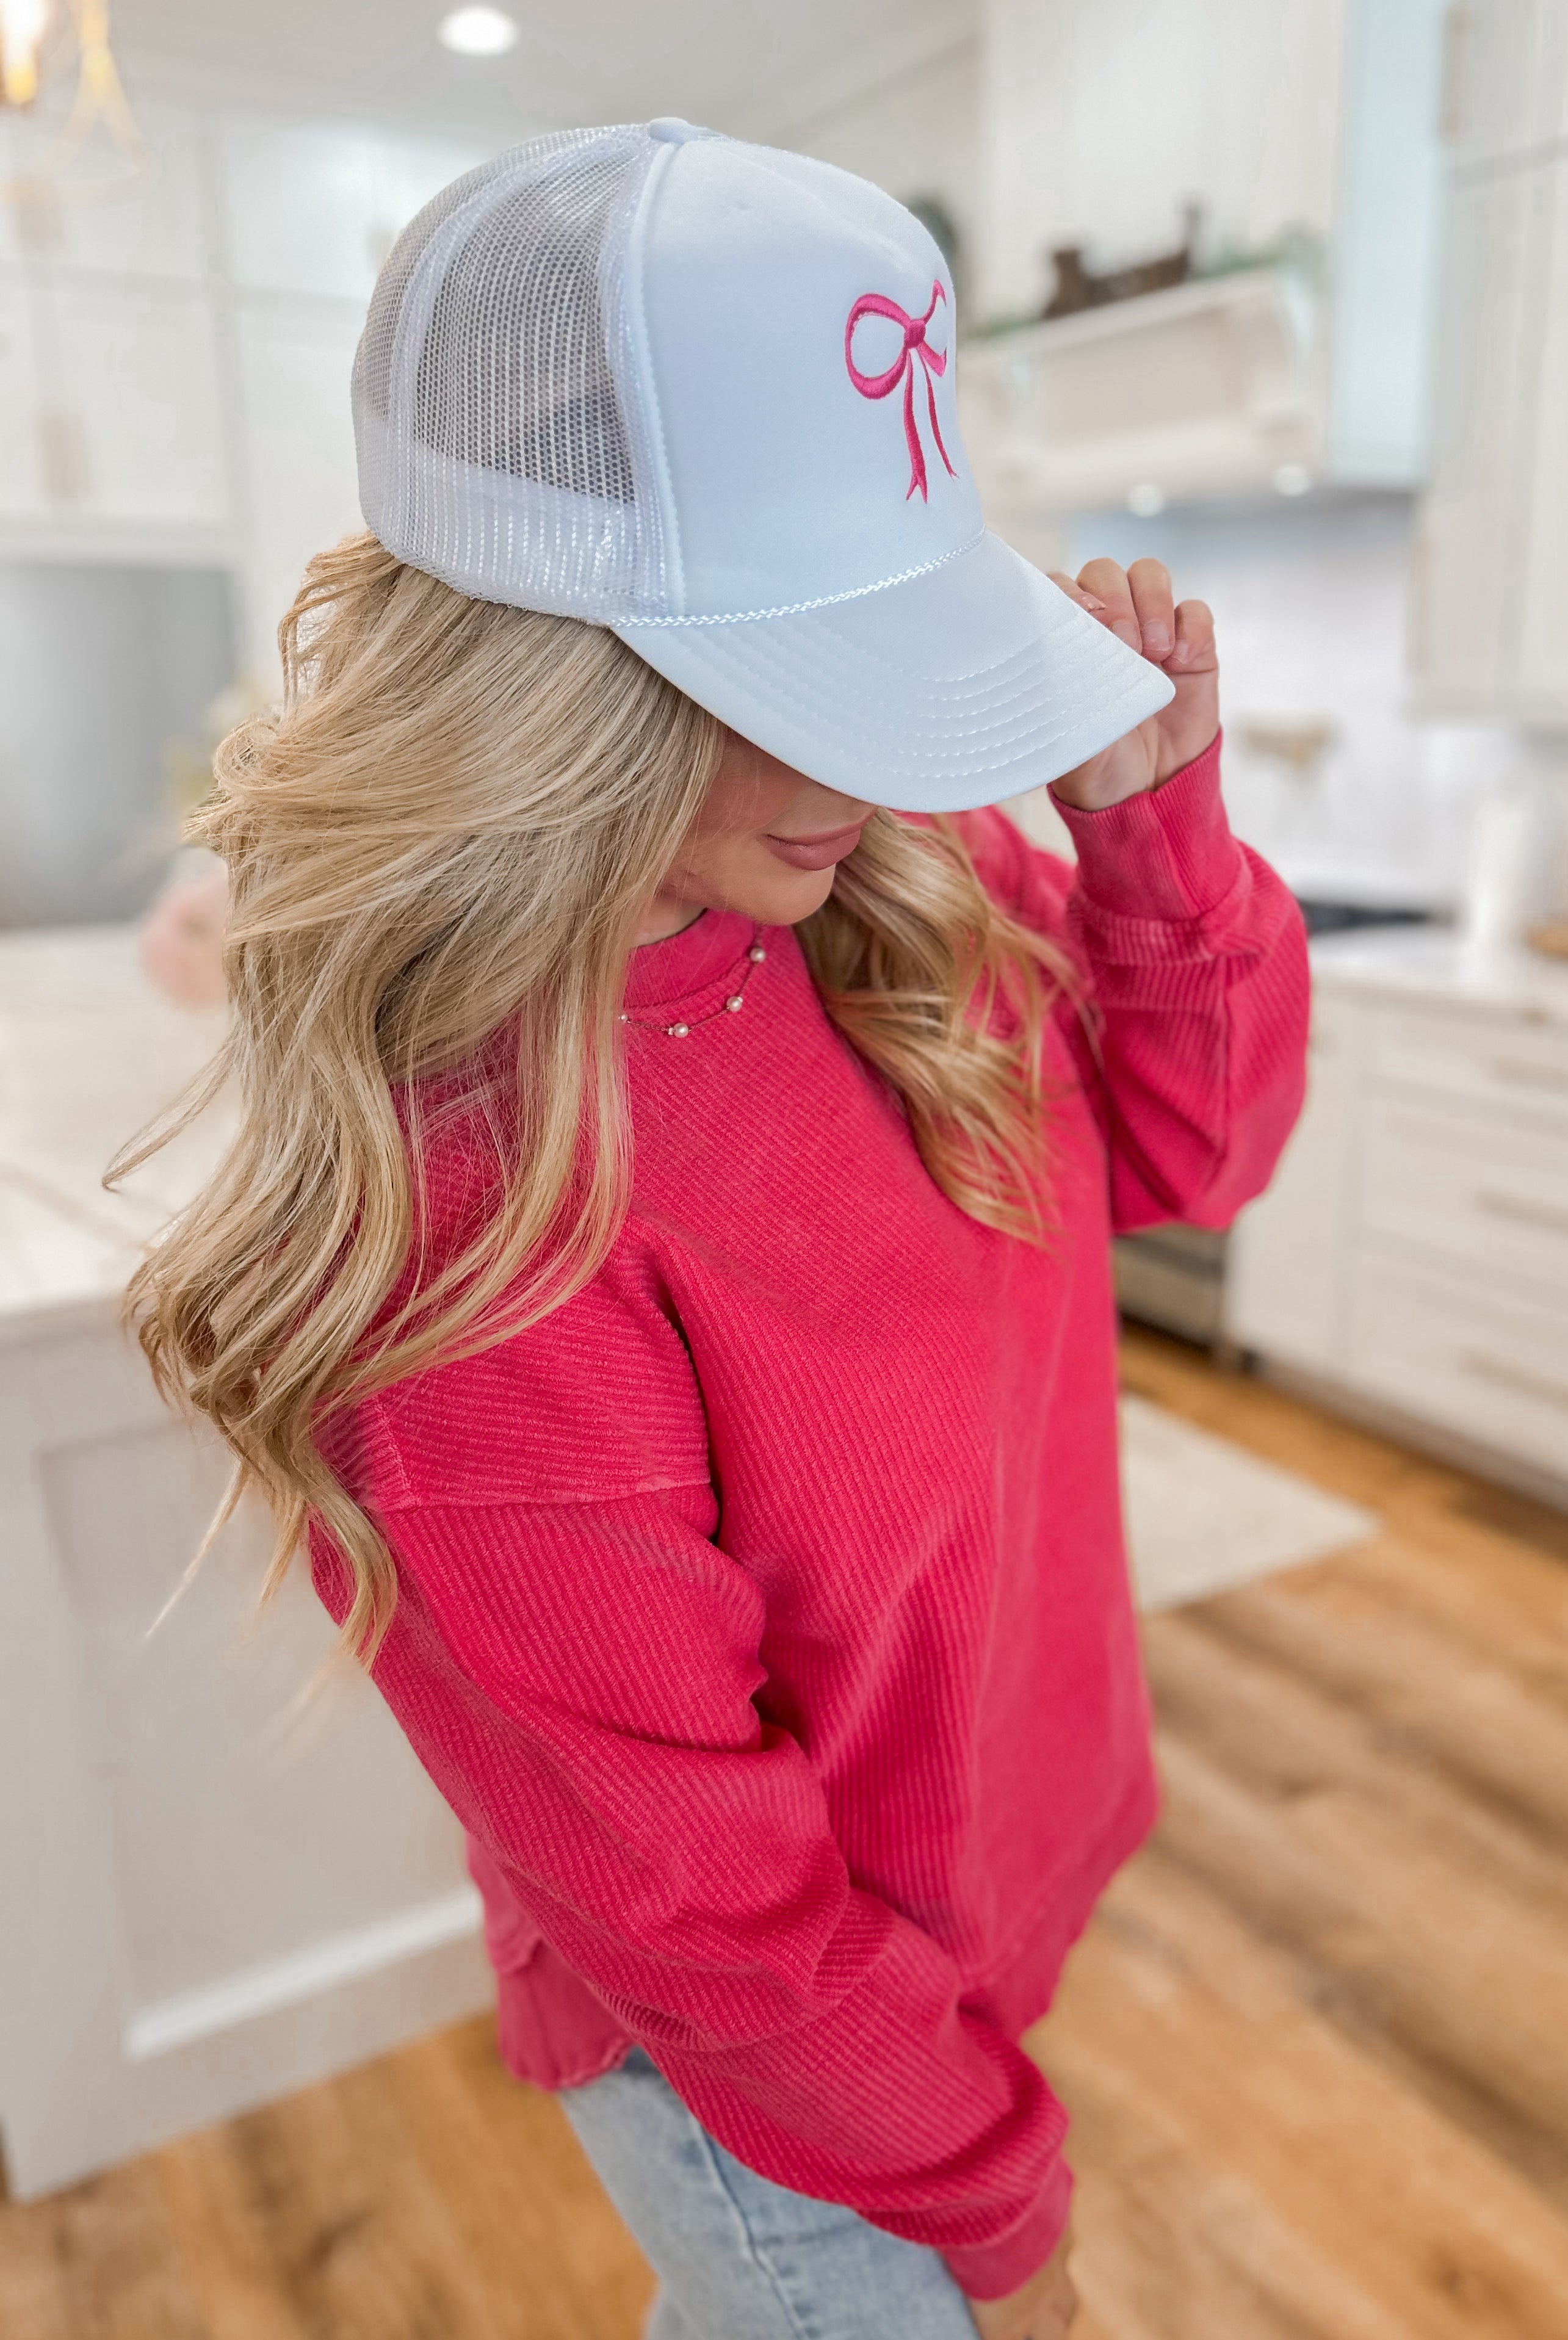 Sweet Bow Comfy Trucker Cap Hat - Be You Boutique